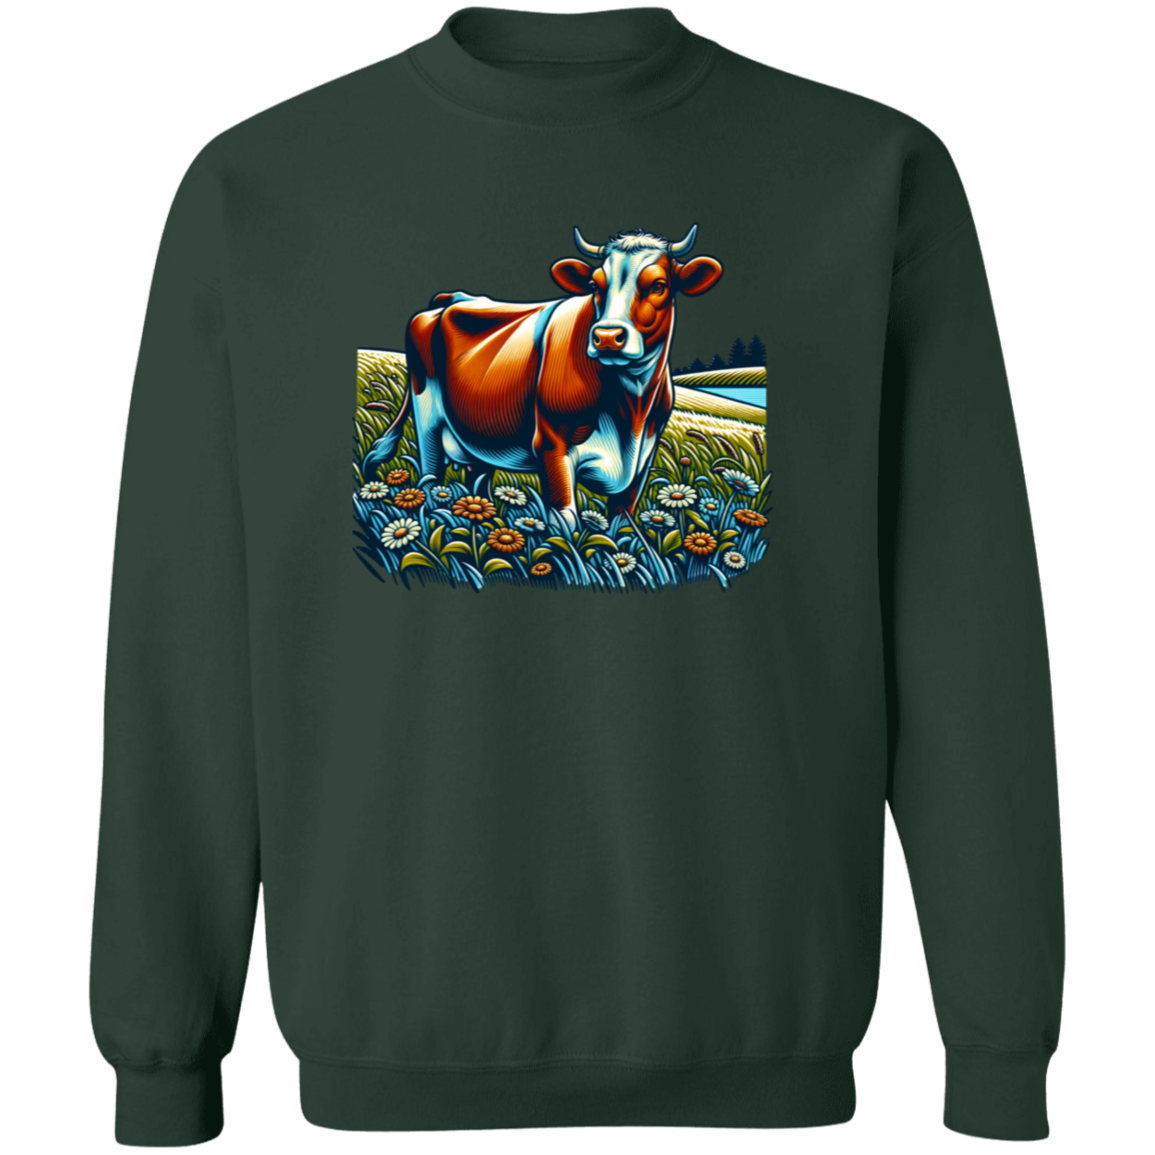 Guernsey with Daisies - T-shirts, Hoodies and Sweatshirts